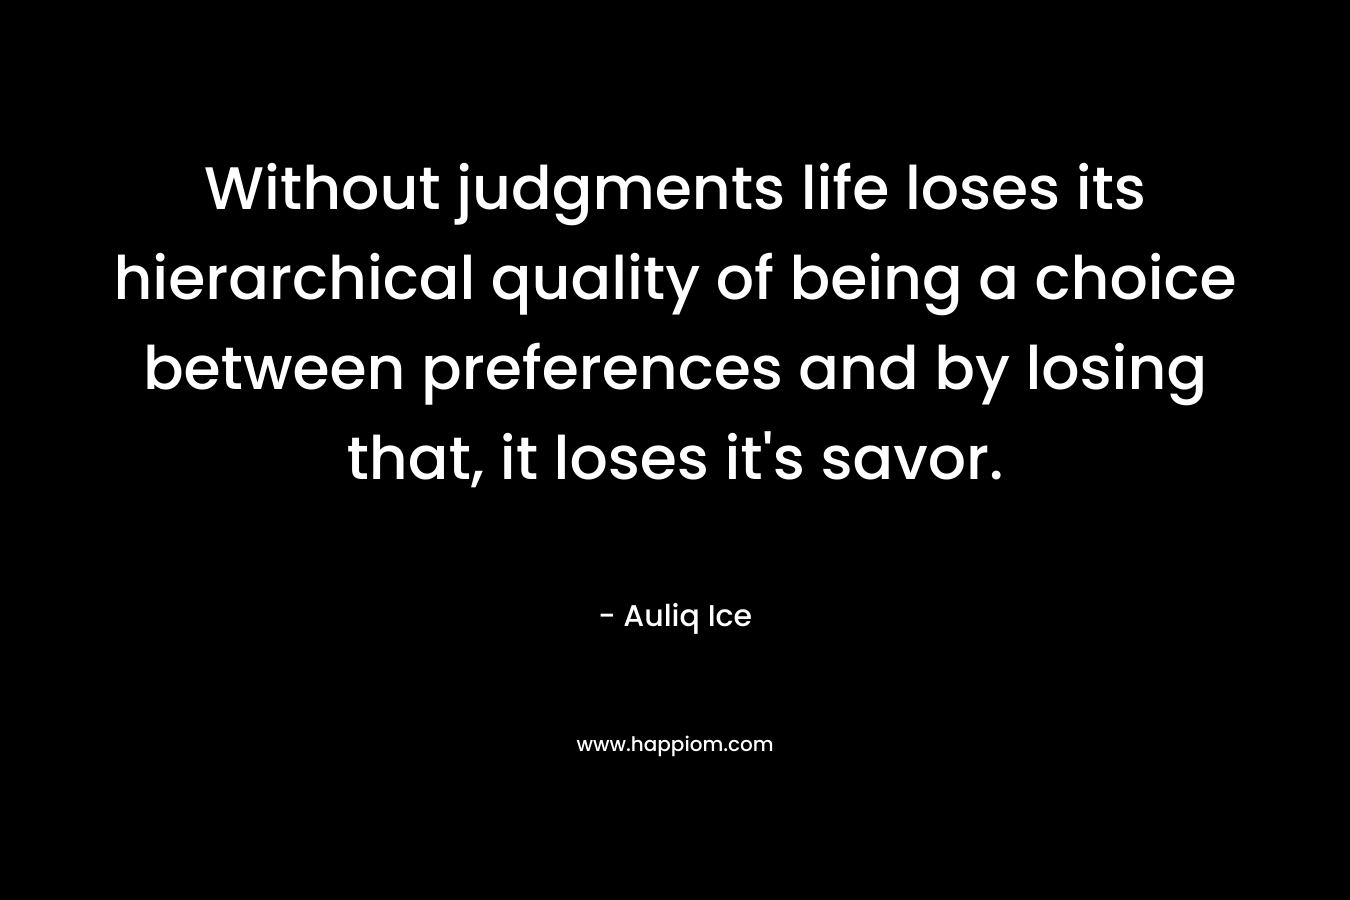 Without judgments life loses its hierarchical quality of being a choice between preferences and by losing that, it loses it's savor.